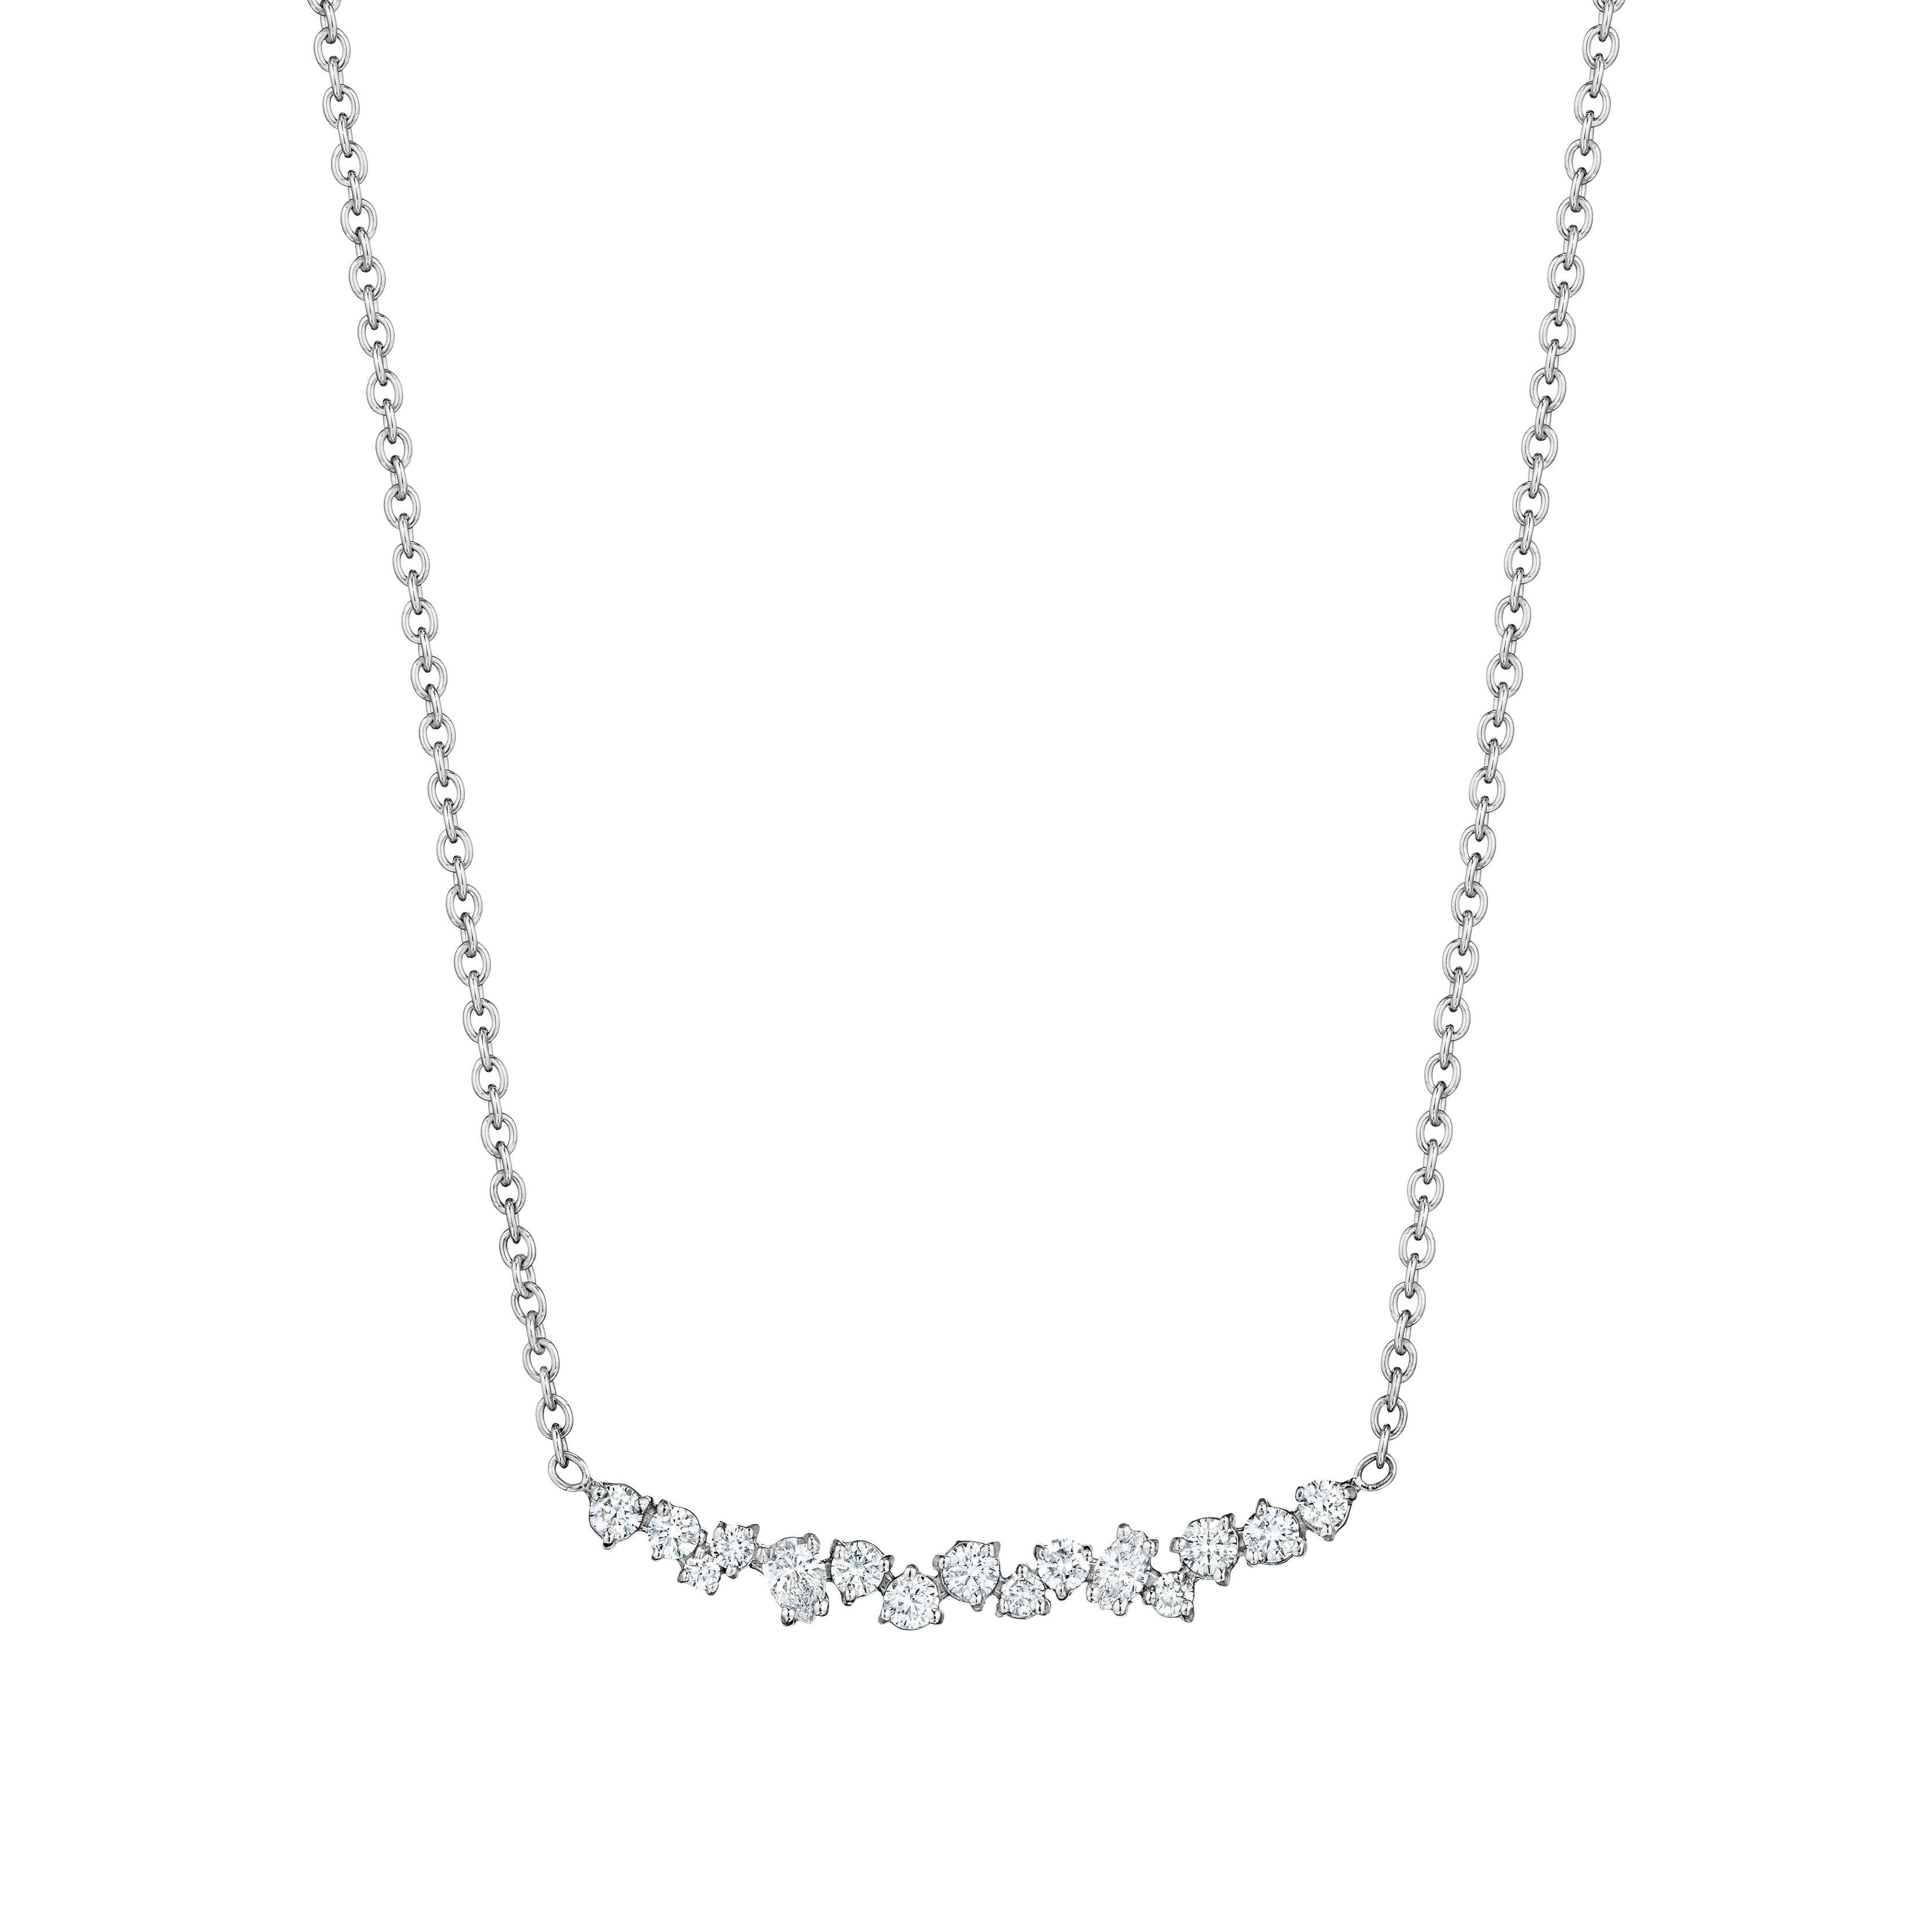 Penny Preville 18K Diamond Station Necklace - 18K Yellow Gold Station,  Necklaces - PPV20679 | The RealReal